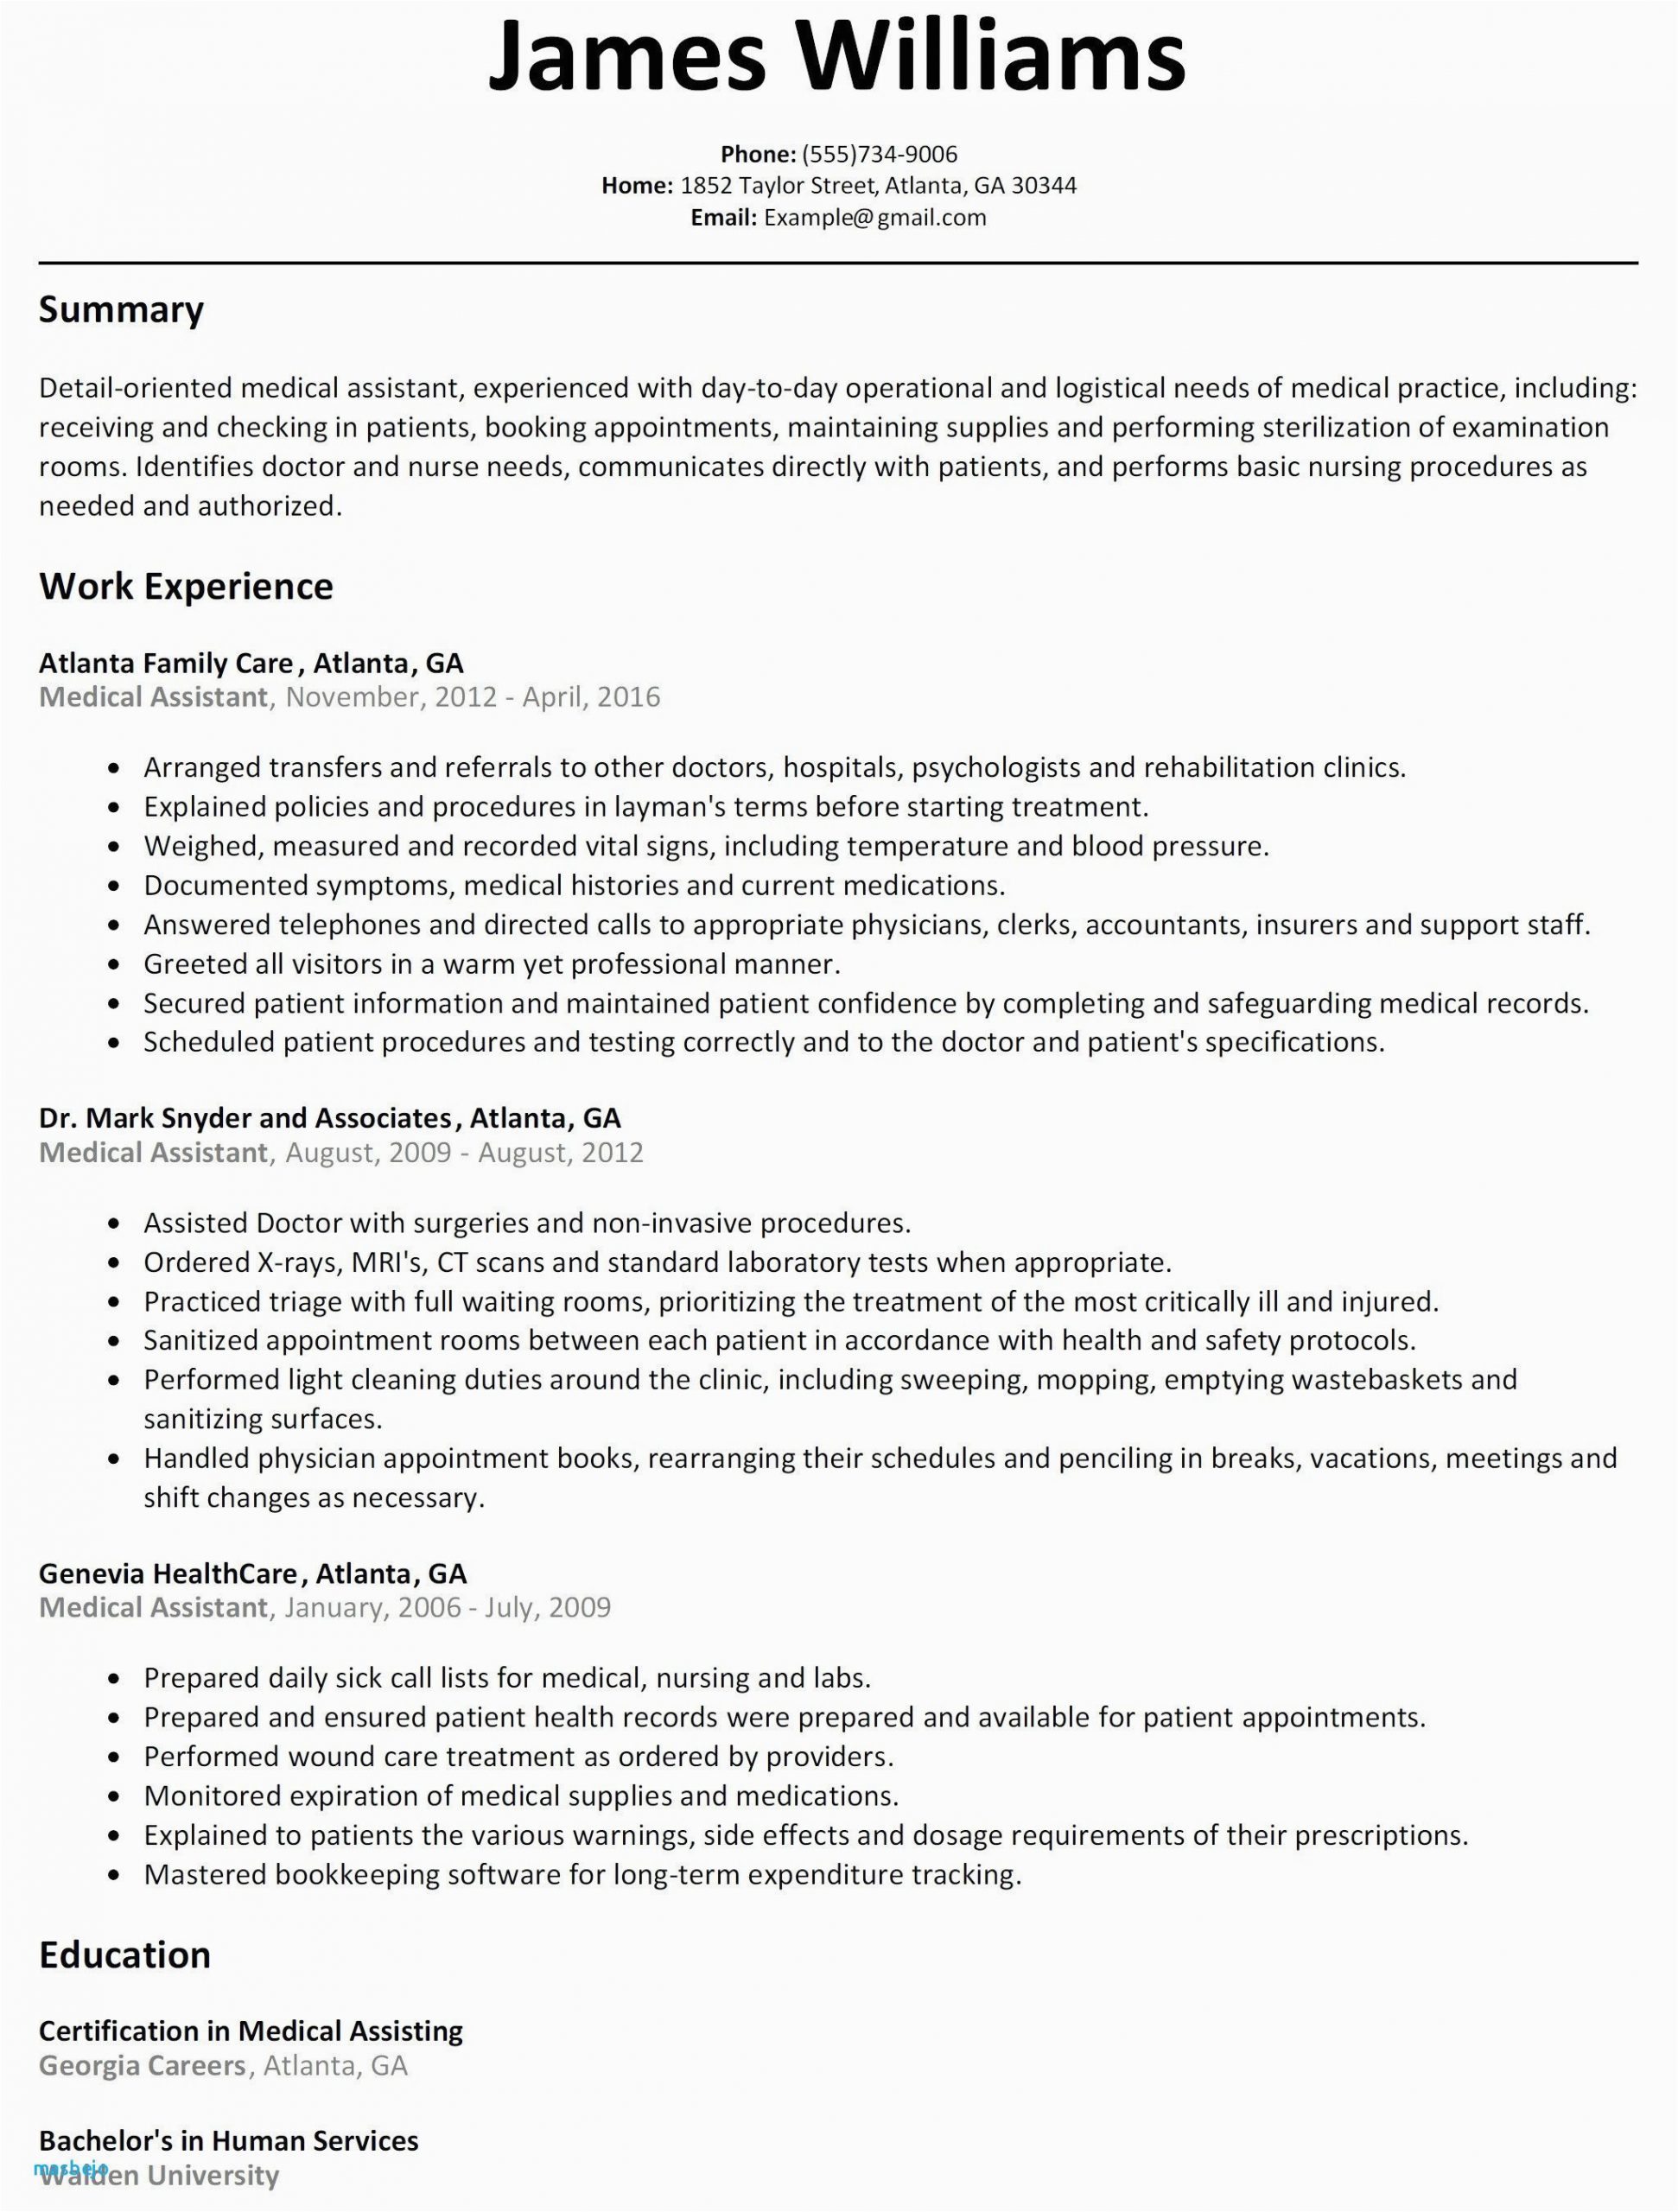 Resume Sample for Administrative assistant with No Experience 68 Beautiful S Resume Examples for Medical